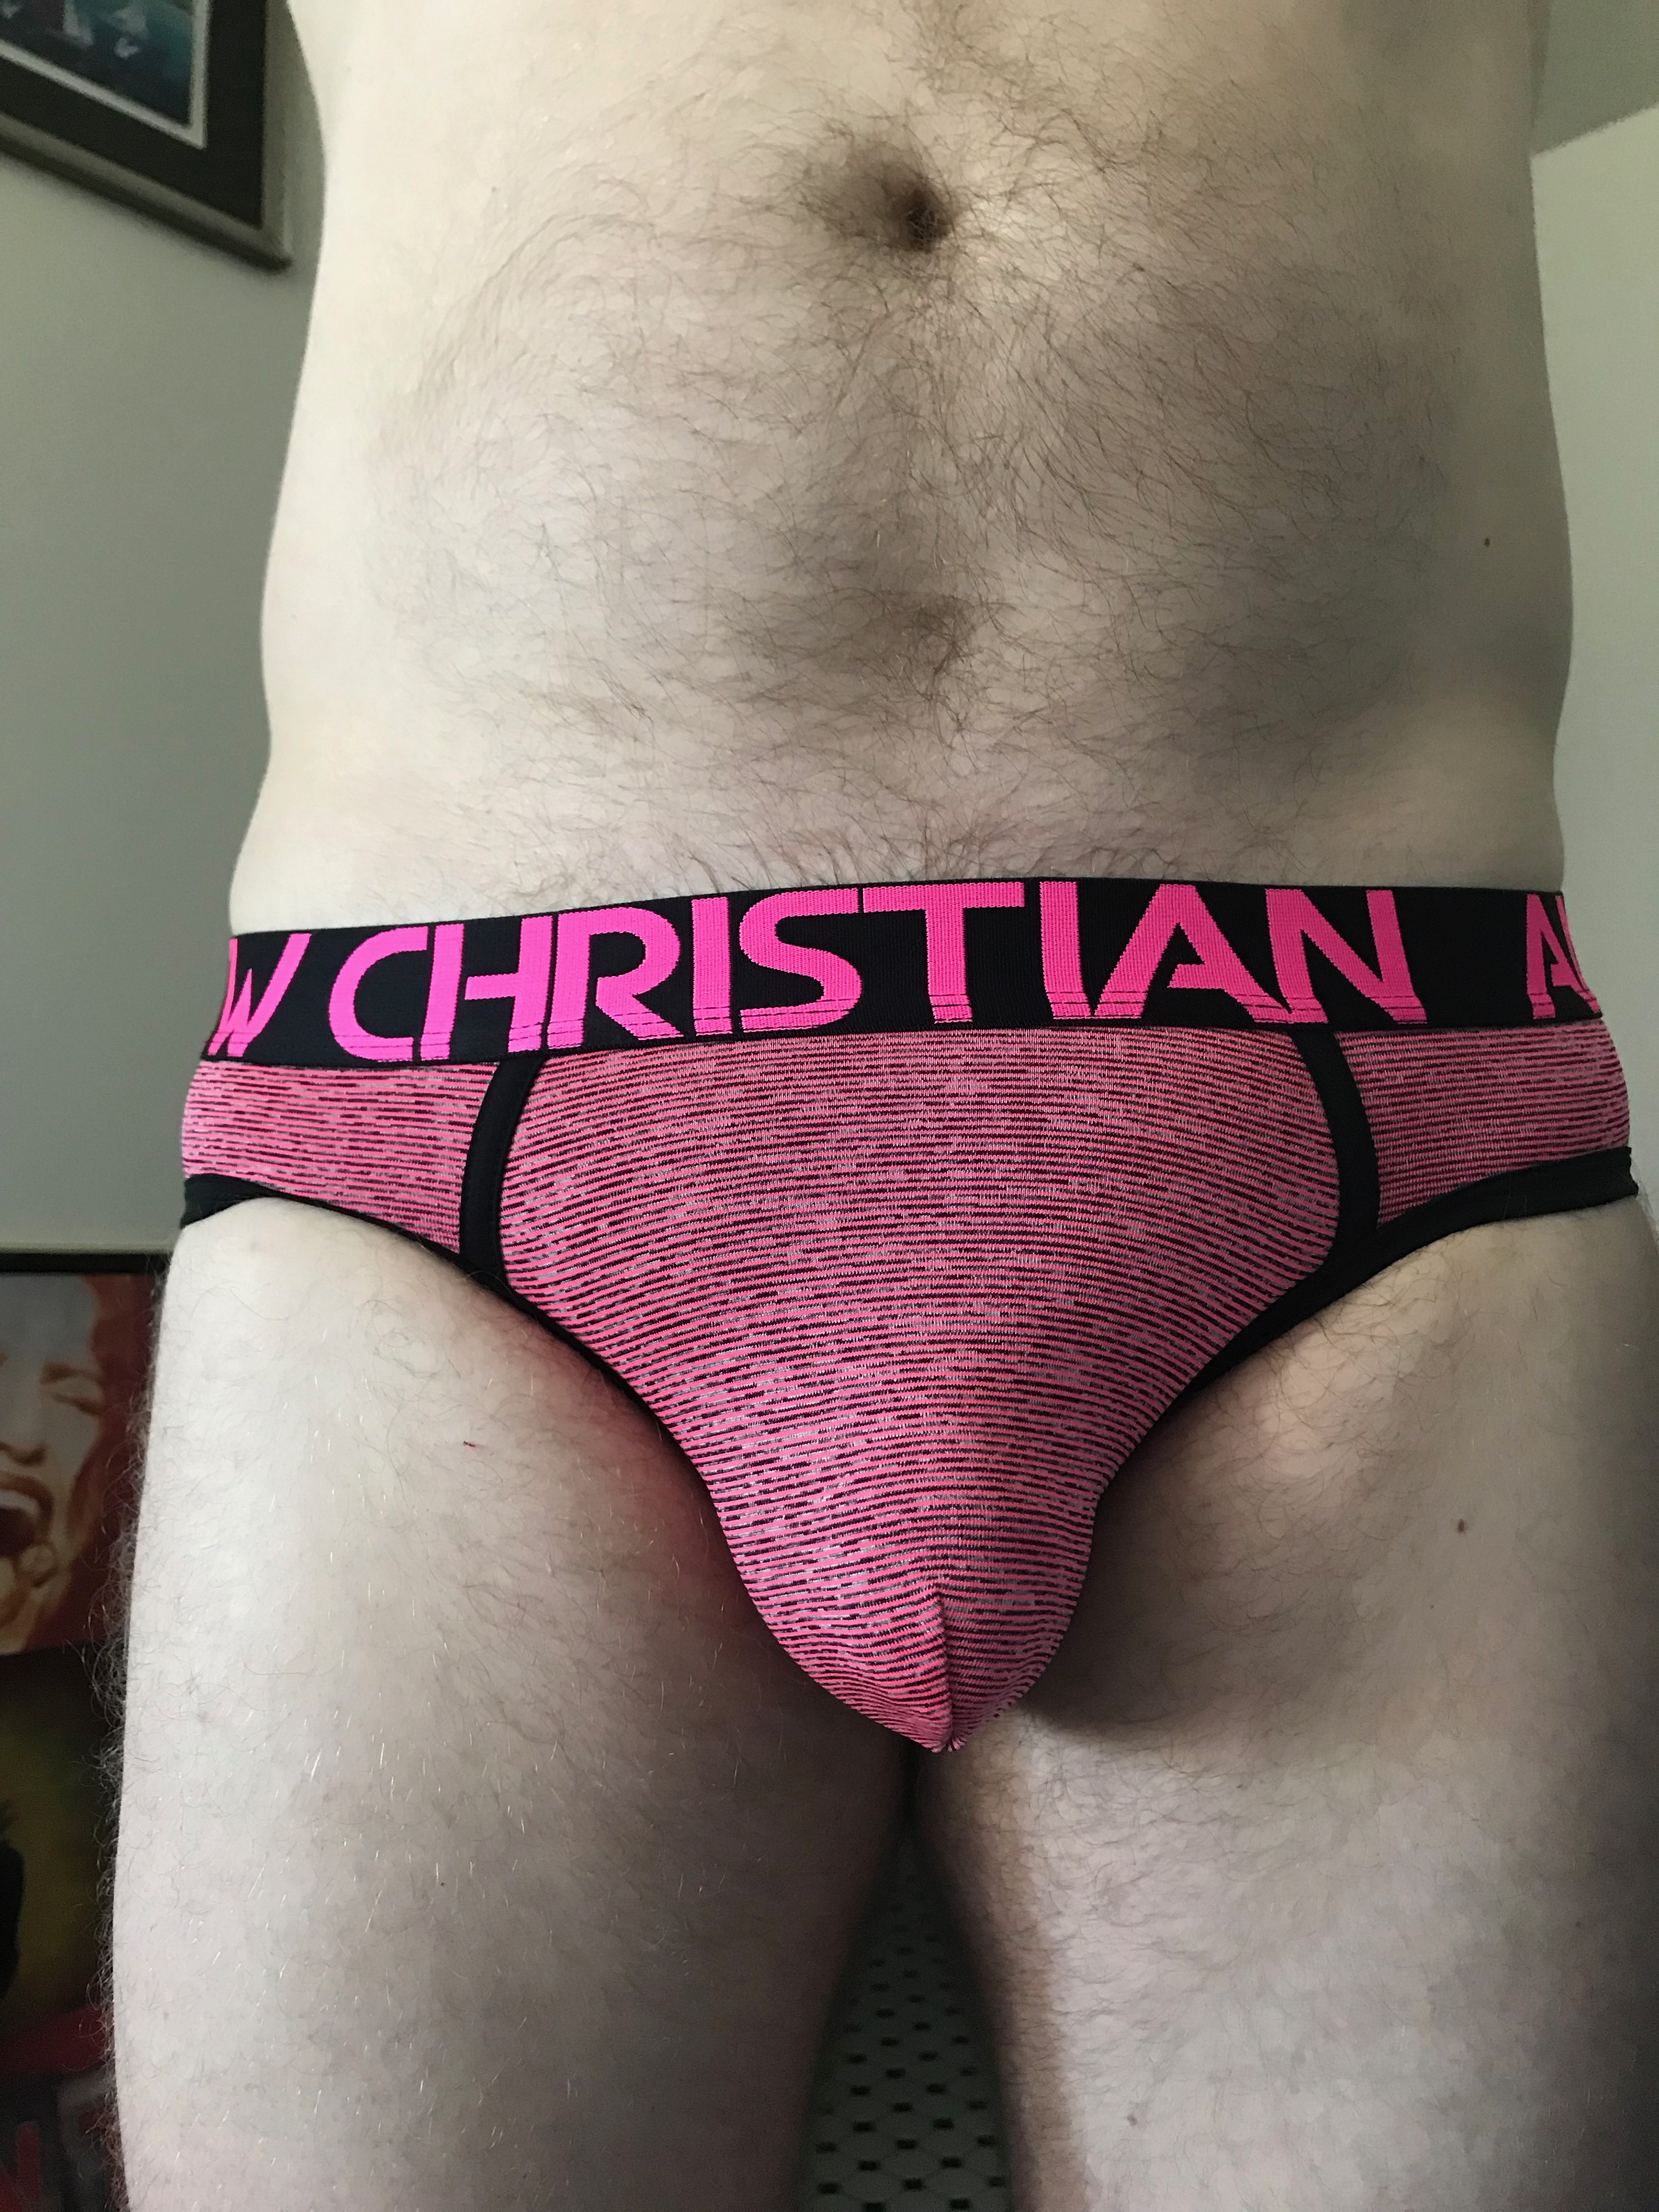 Approval for the humpday briefs…